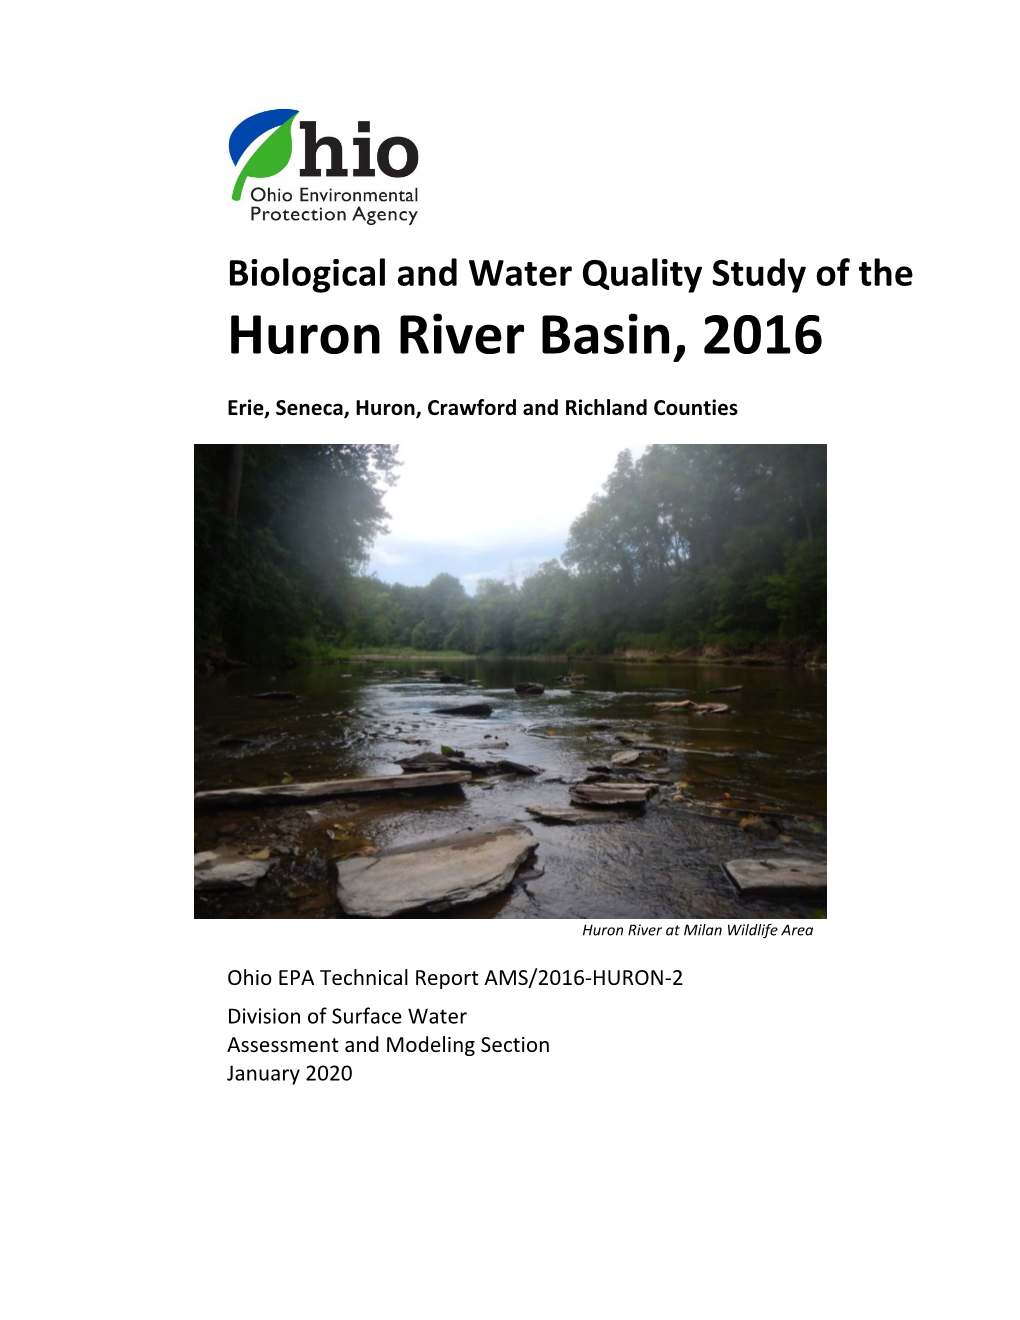 Biological and Water Quality Study of the Huron River Basin, 2016